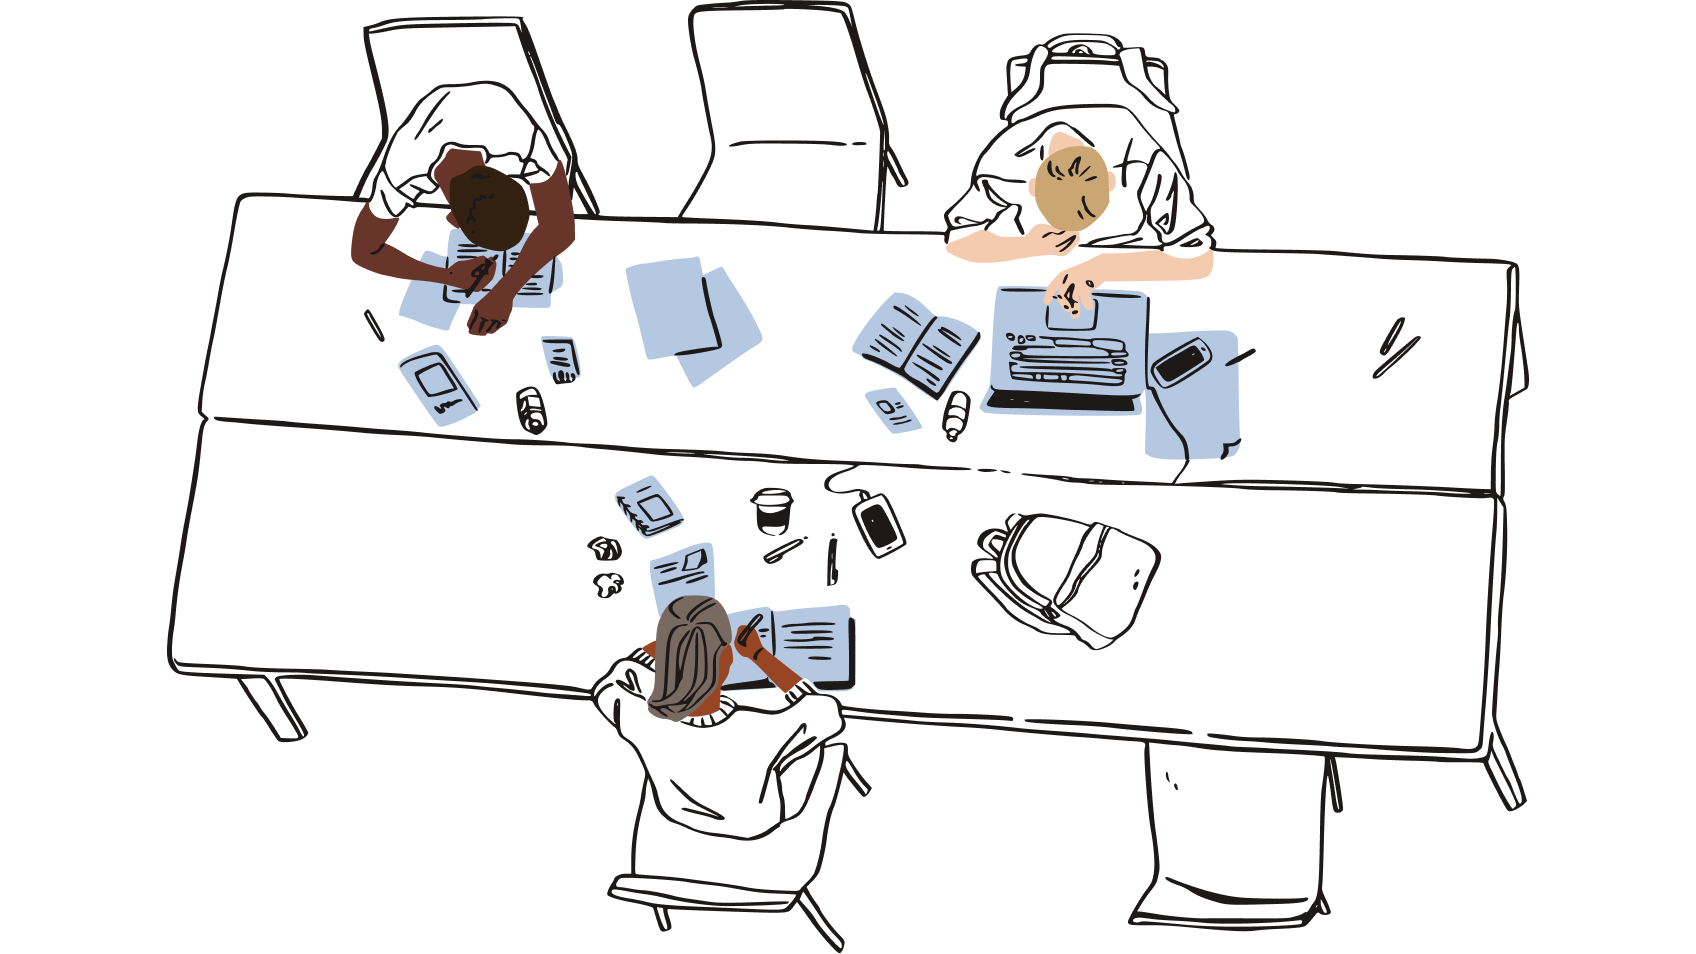 An illustration of a group of people collaborating at a table.